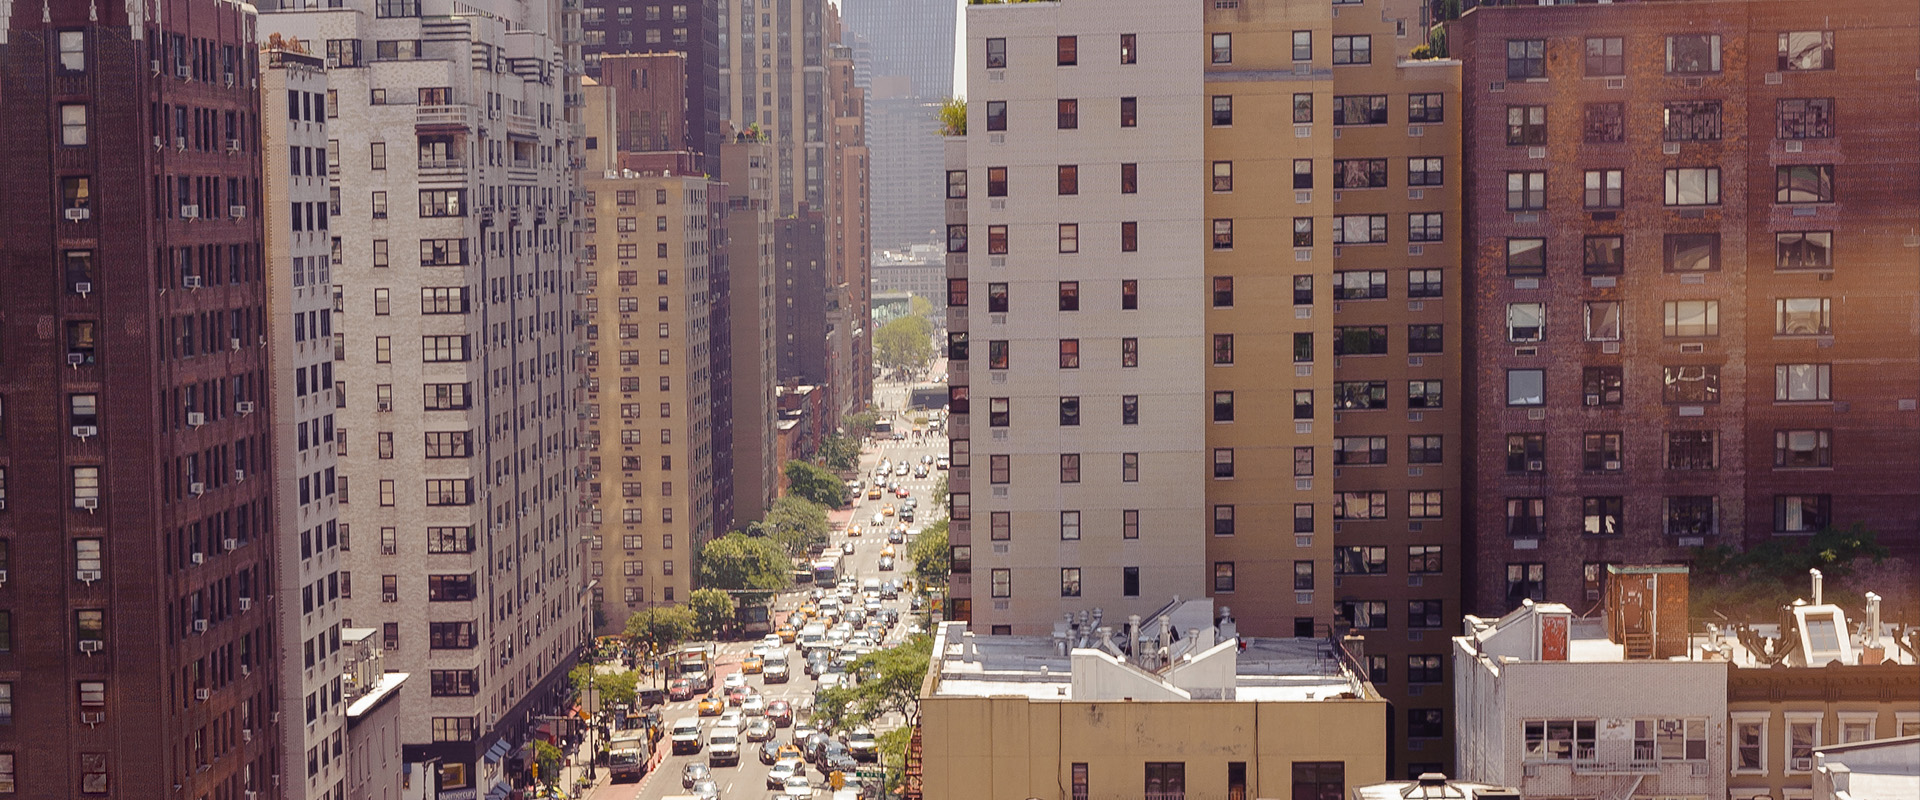 Tall buildings in New York City next to a busy street